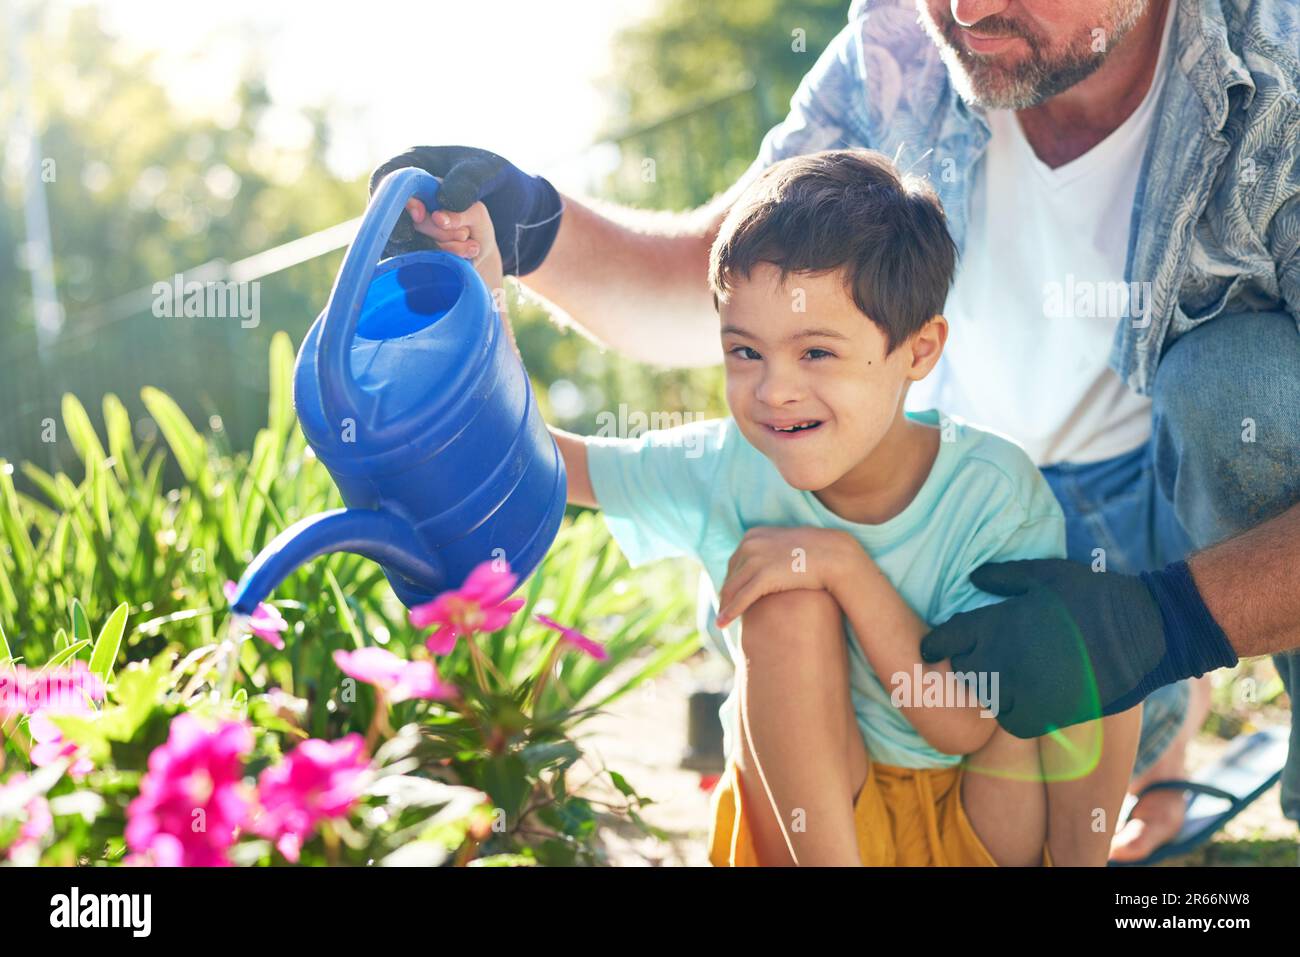 Portrait happy boy with Down Syndrome watering flowers with father Stock Photo